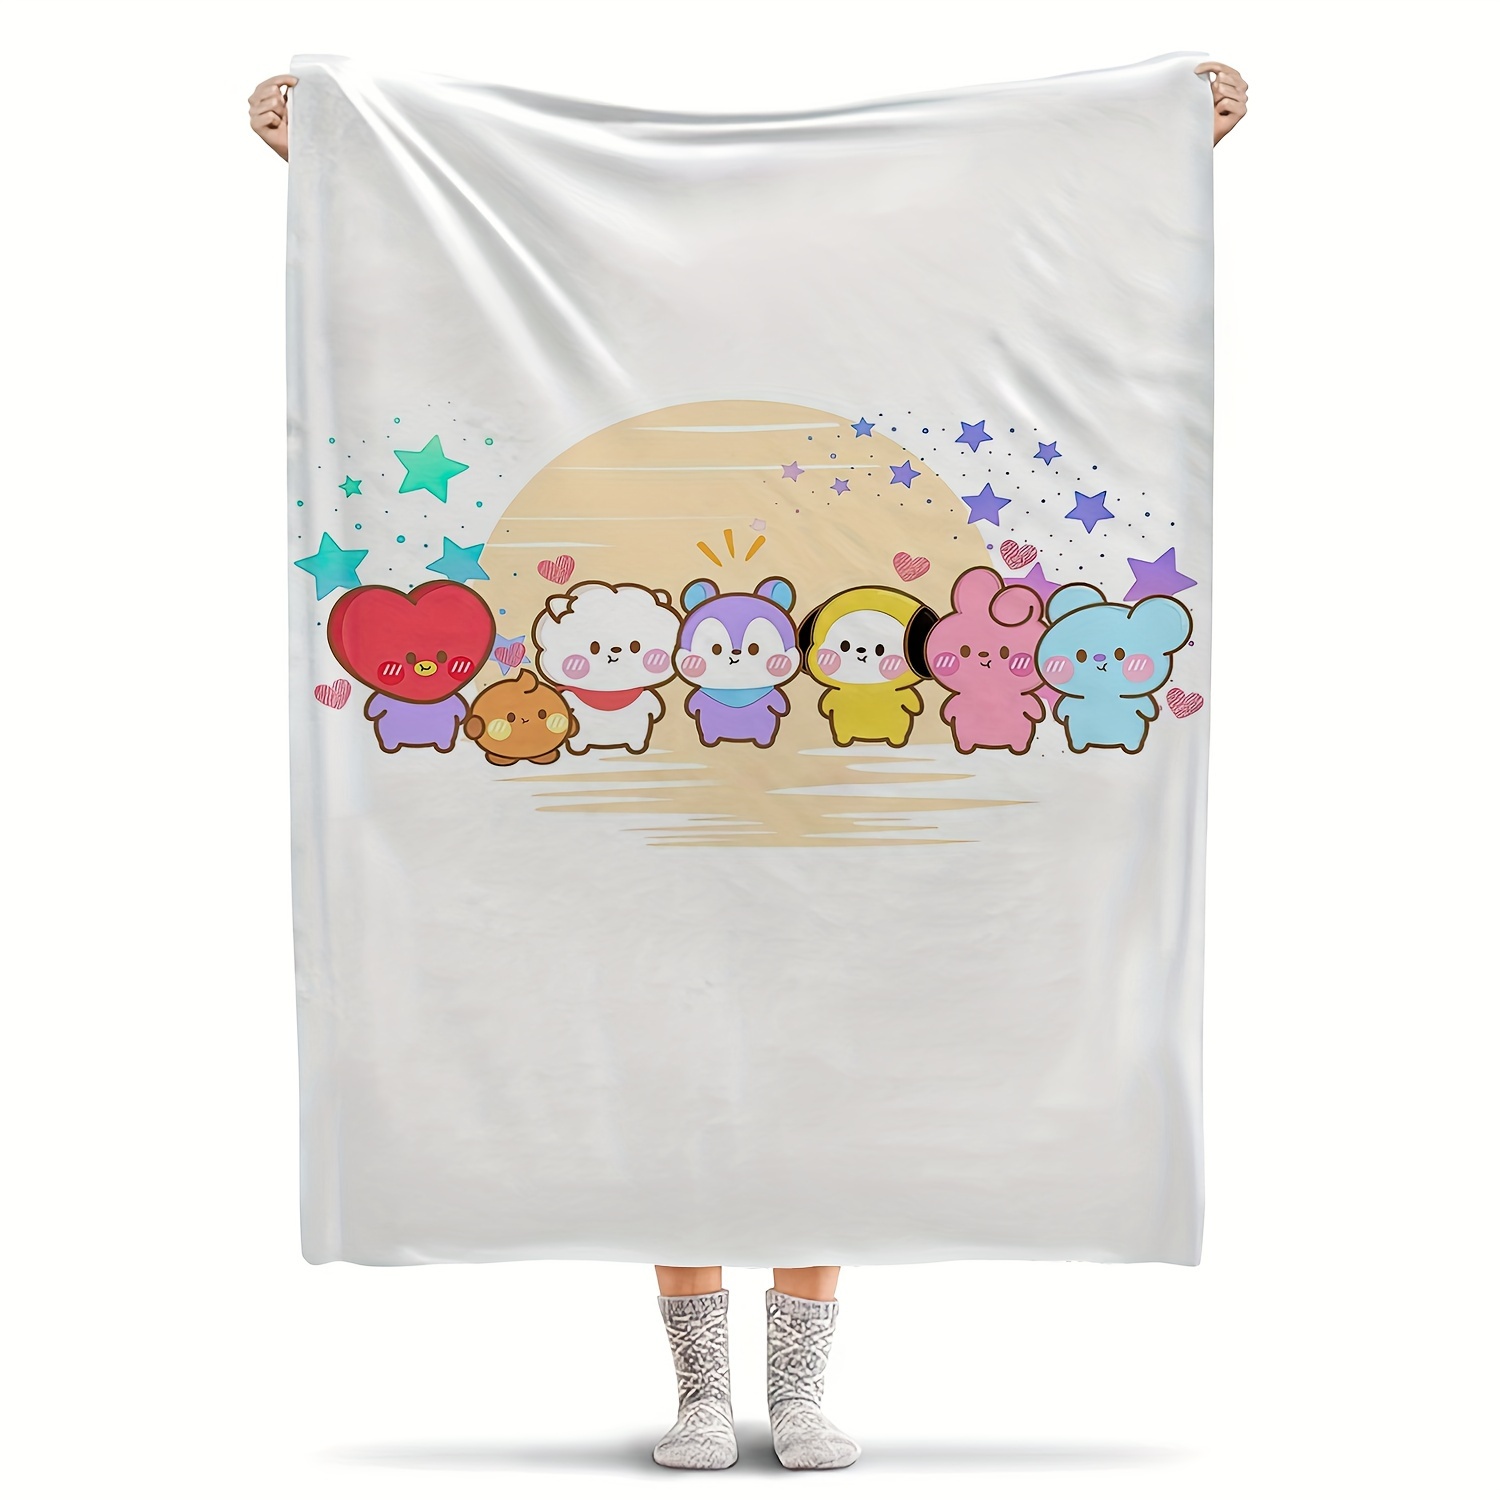 

K-pop Bts-inspired Glam Throw Blanket | Machine Washable | Digital Print With Vibrant Characters | Reversible All-season Flannel | 100% Polyester | Multipurpose, Ideal For Home Decor And Fans